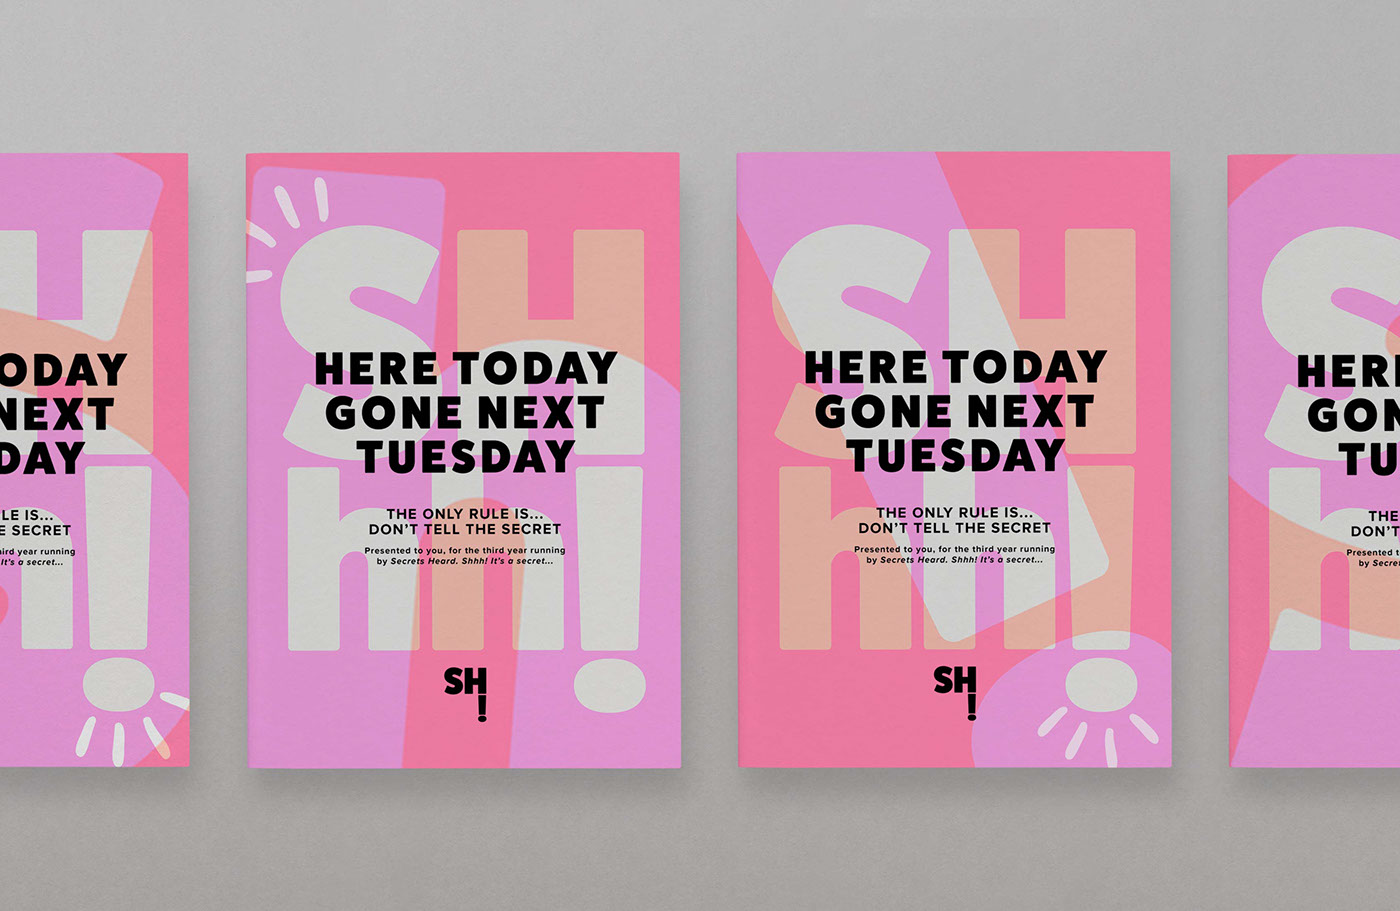 Here Today Gone Next Tuesday by Christian Andree & Elki Lemmetty